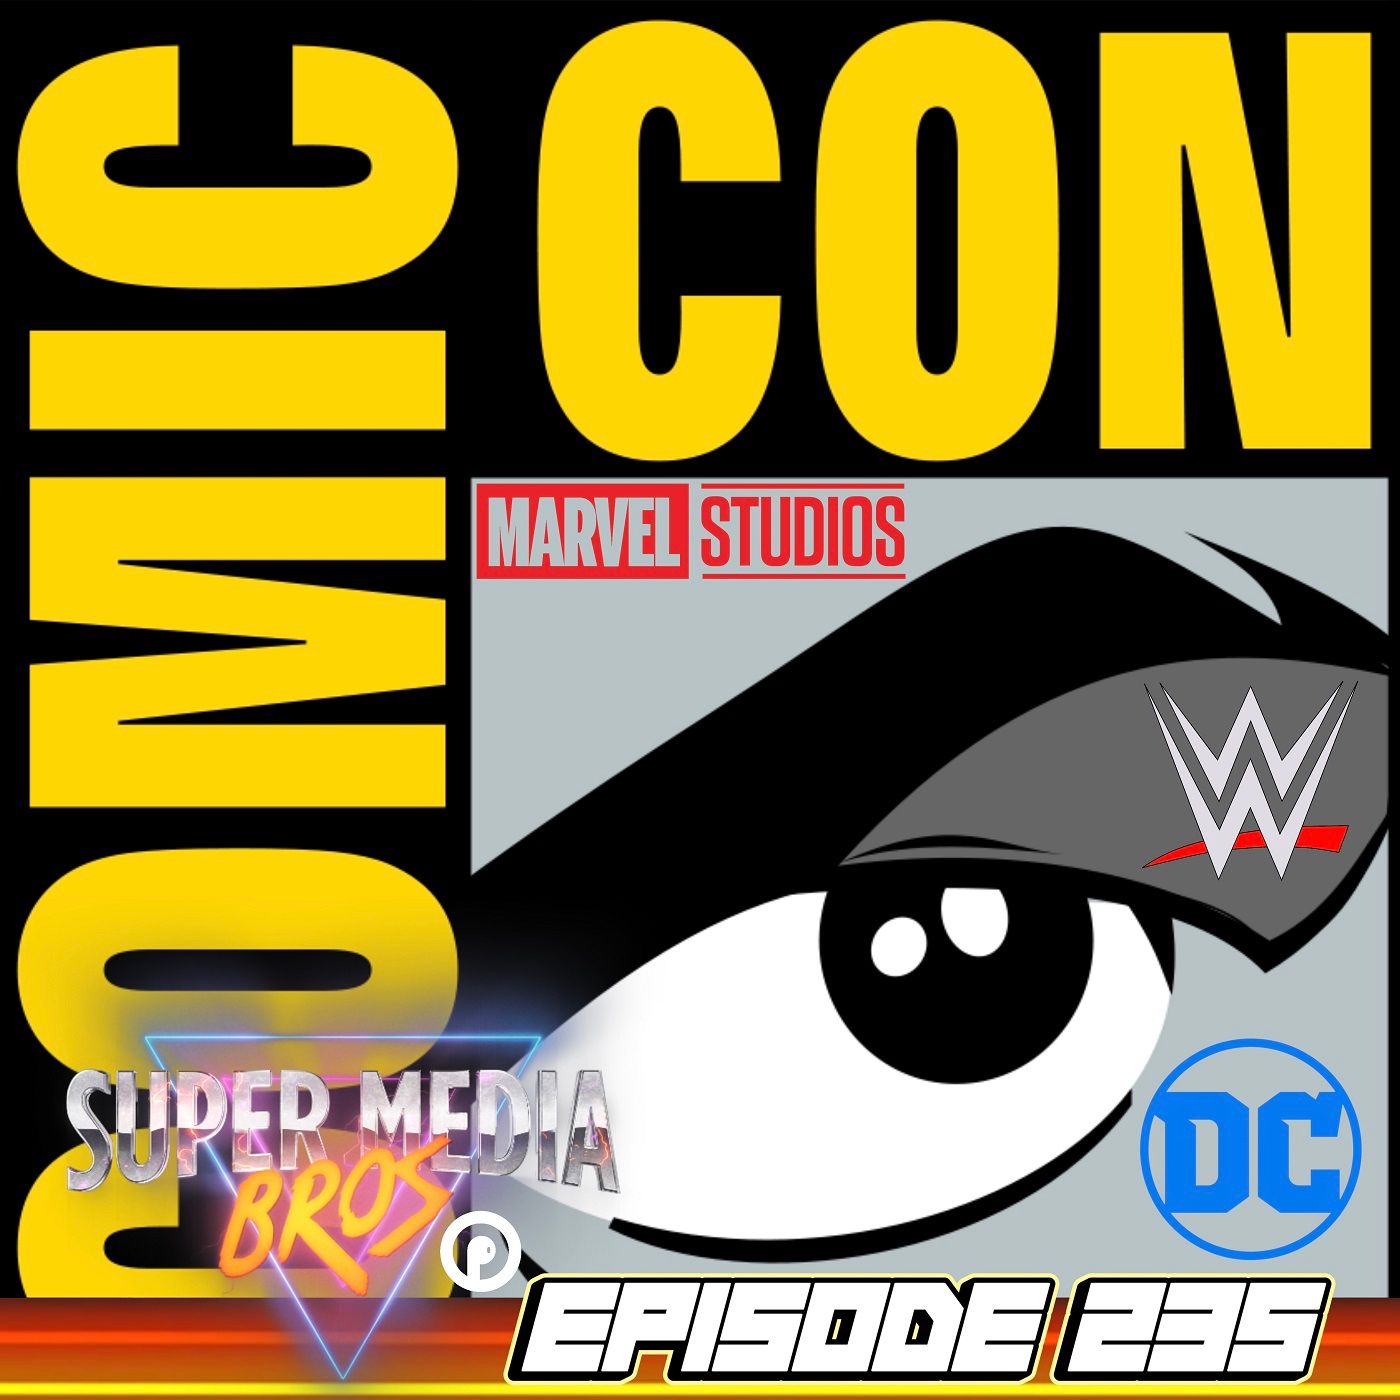 SDCC: Superheroes and Superzeroes (Ep. 235) Image